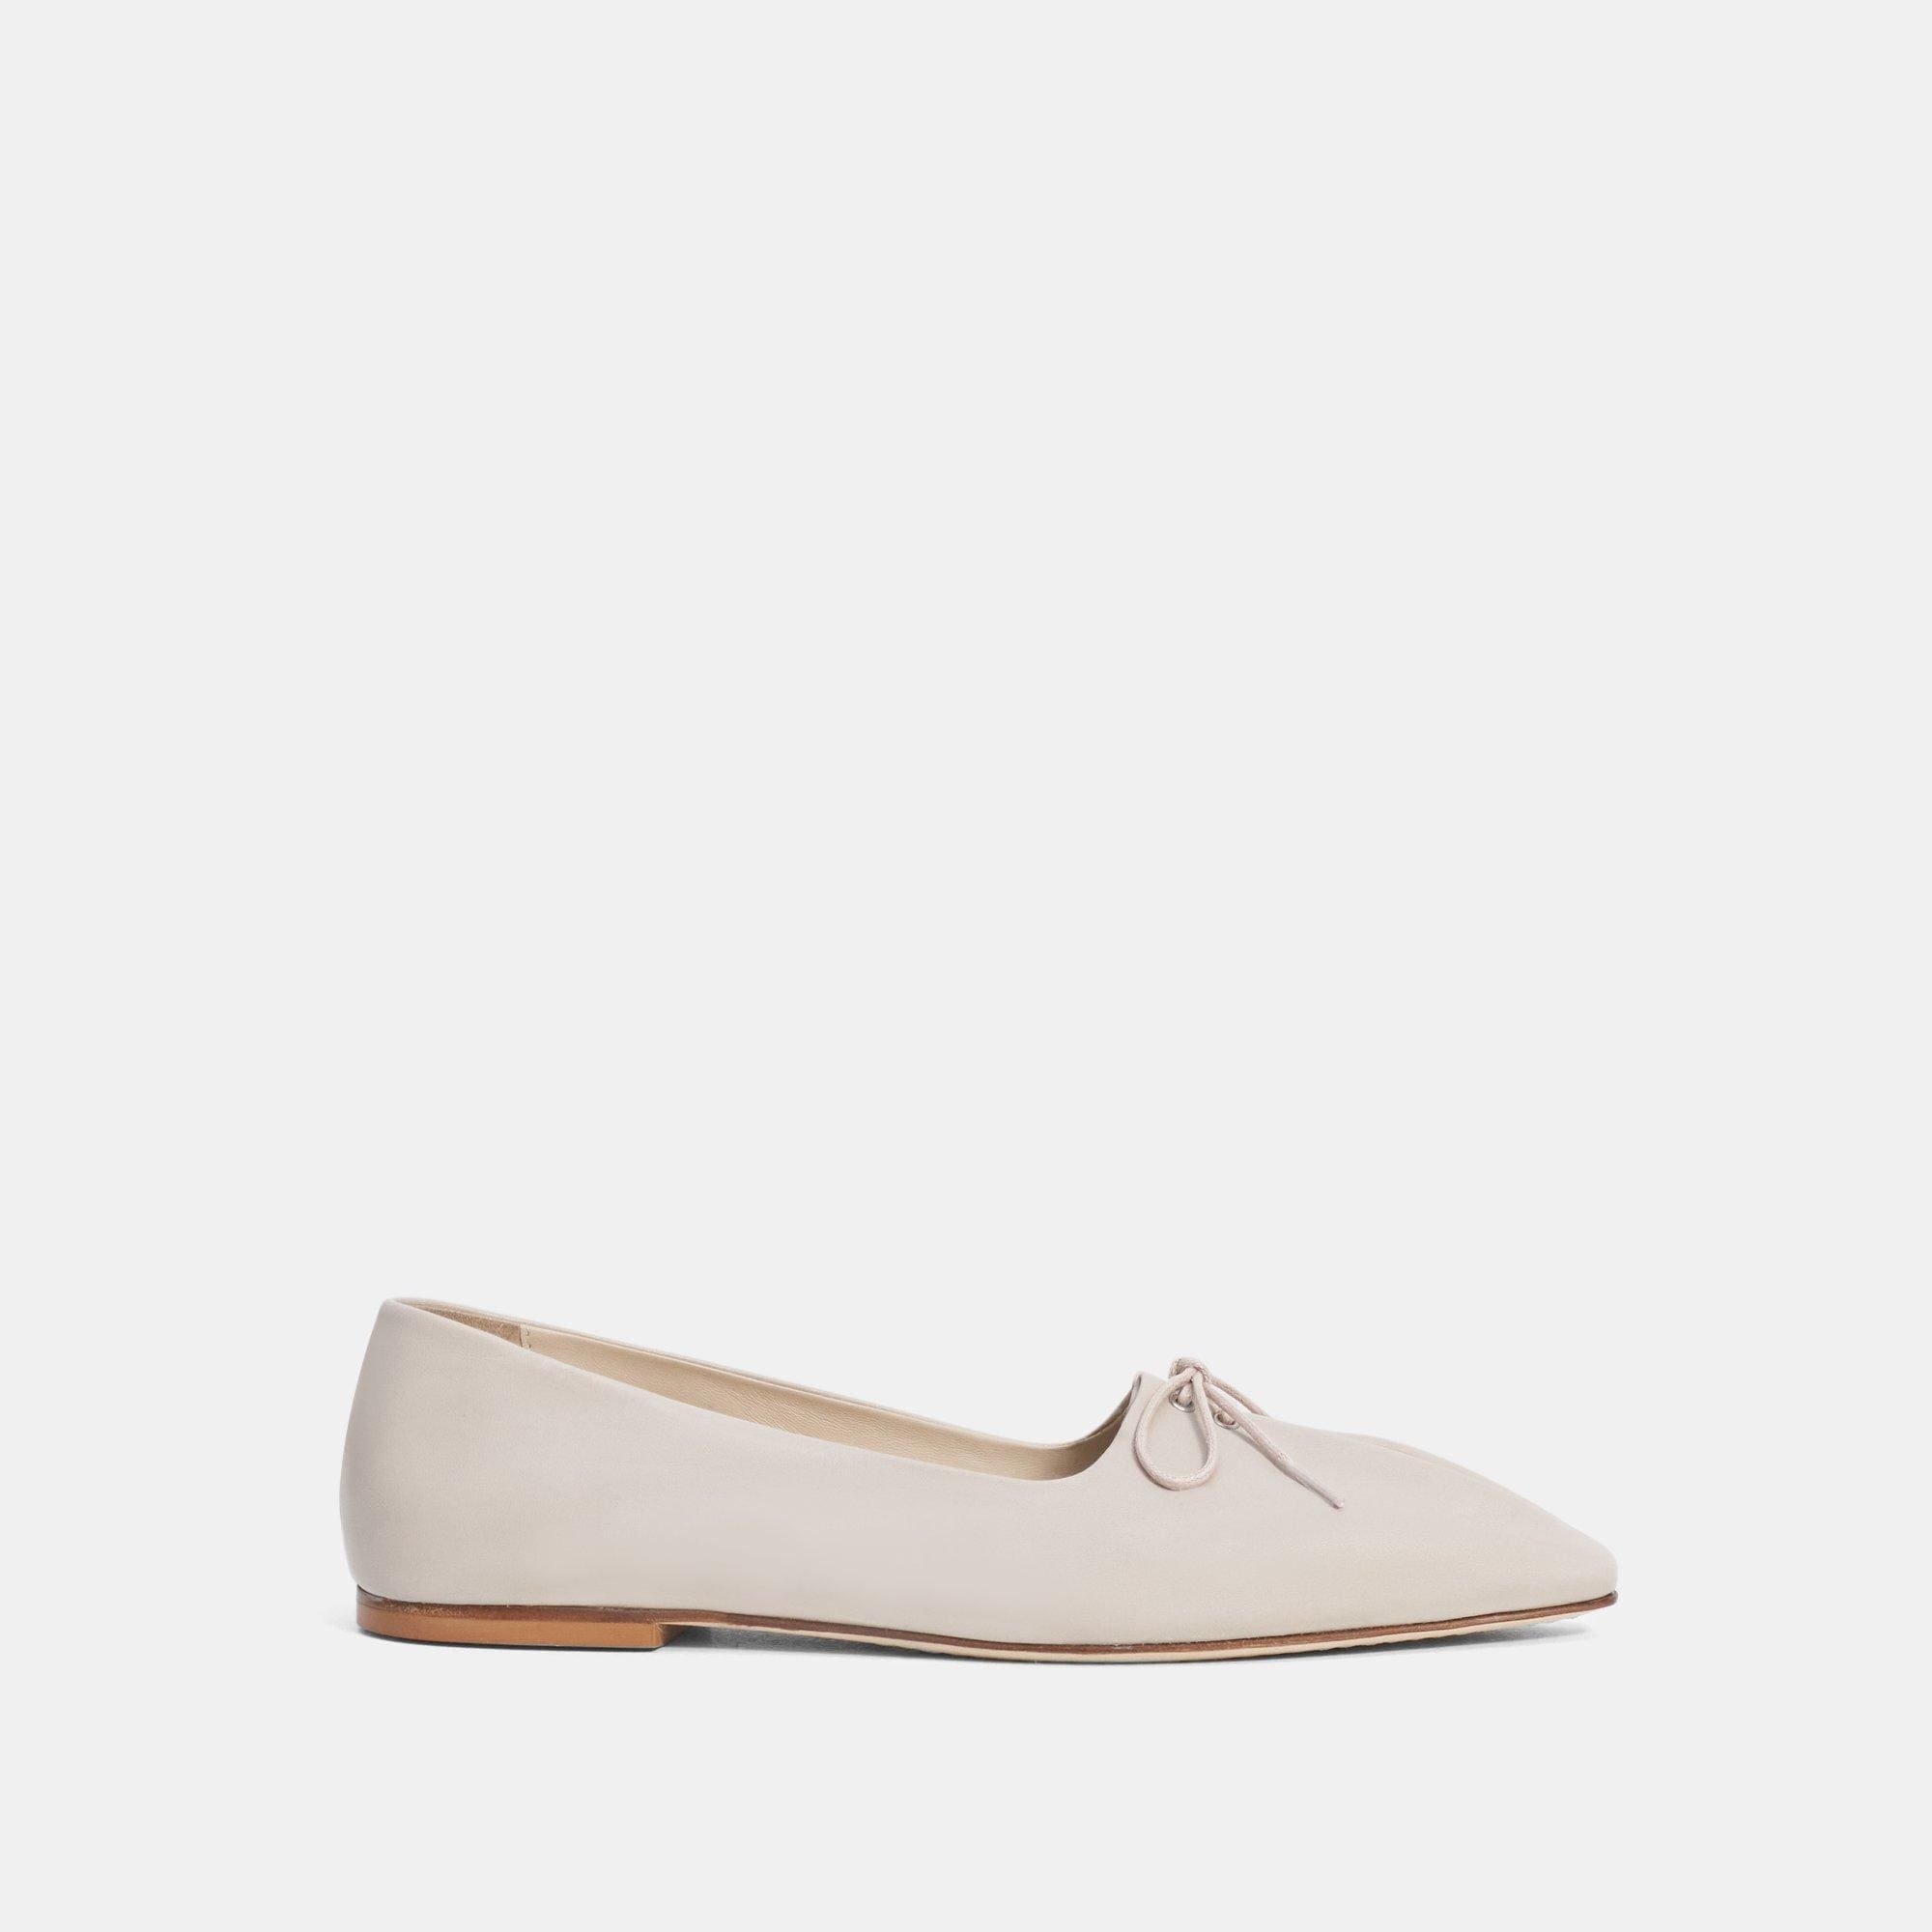 Theory Pleated Ballet Flat in Leather